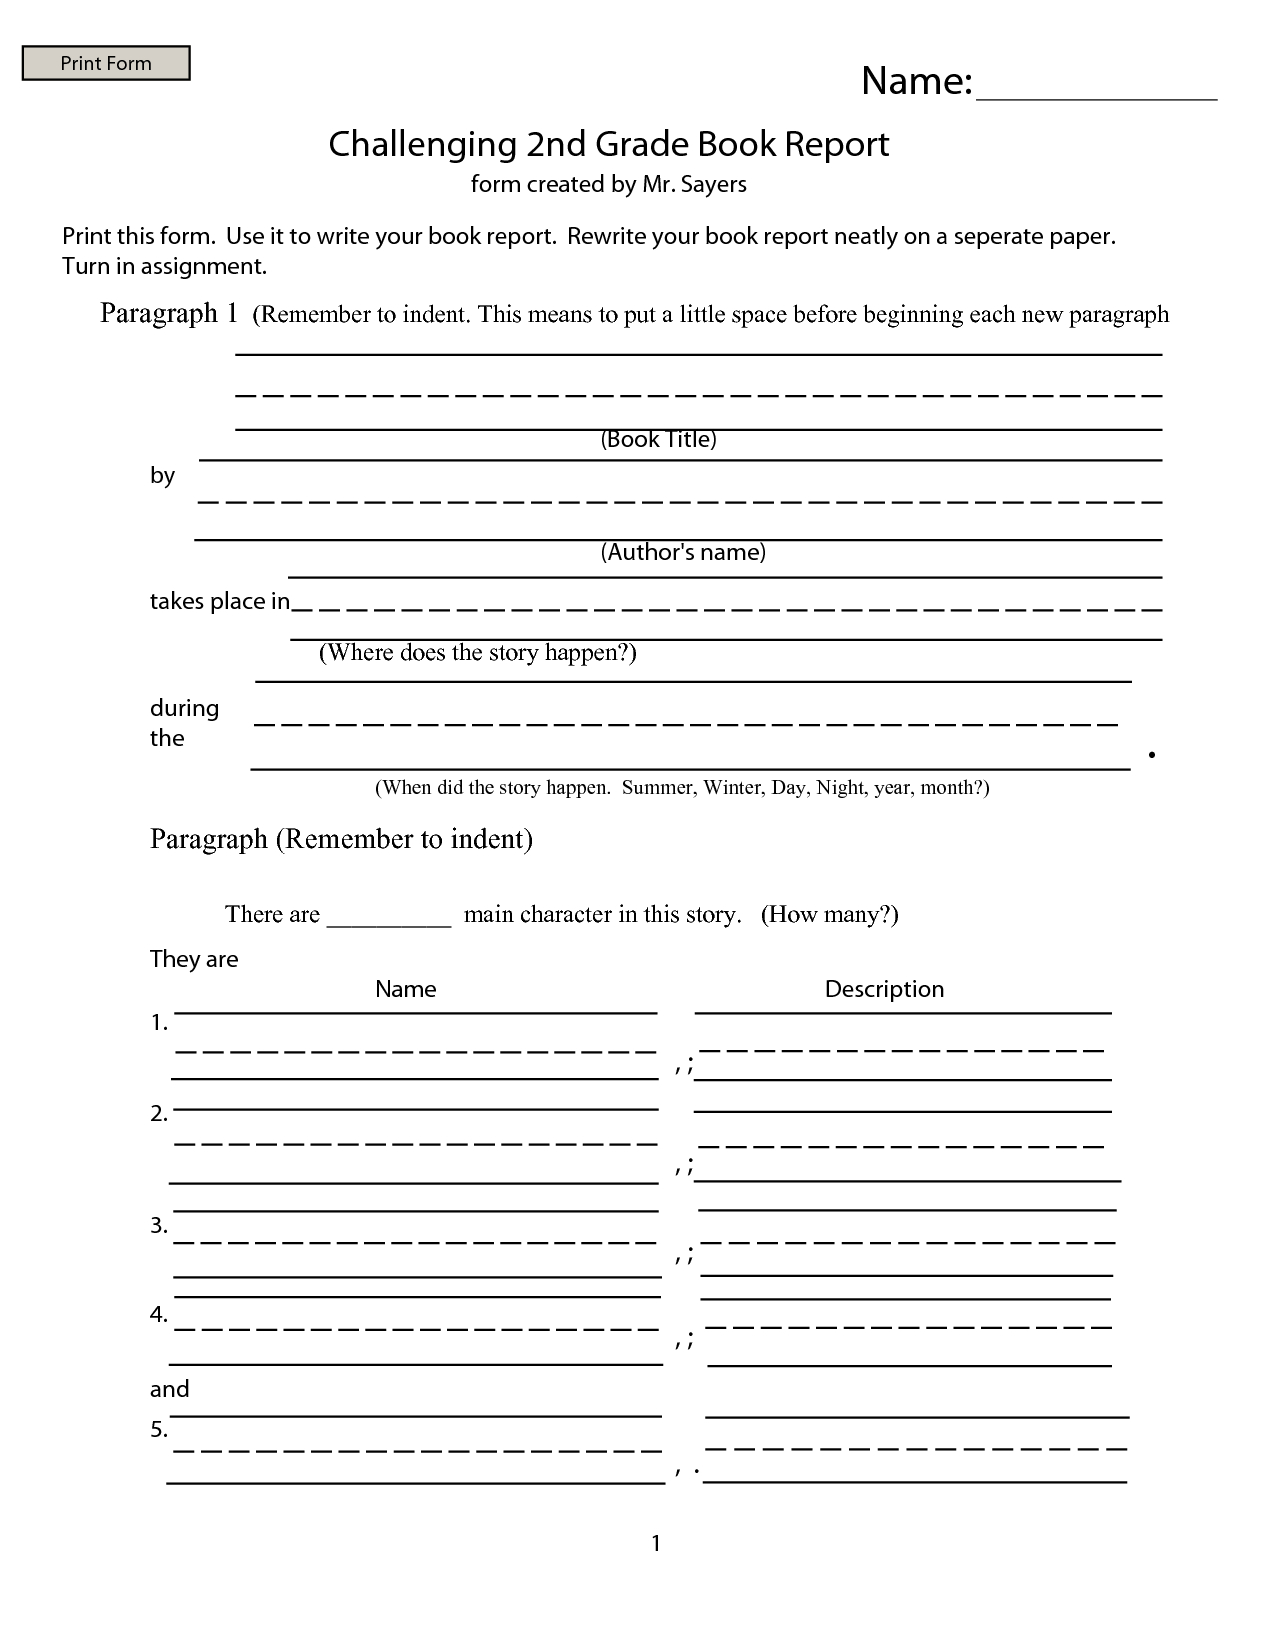 Worksheet Book Report | Printable Worksheets And Activities With Book Report Template 2Nd Grade